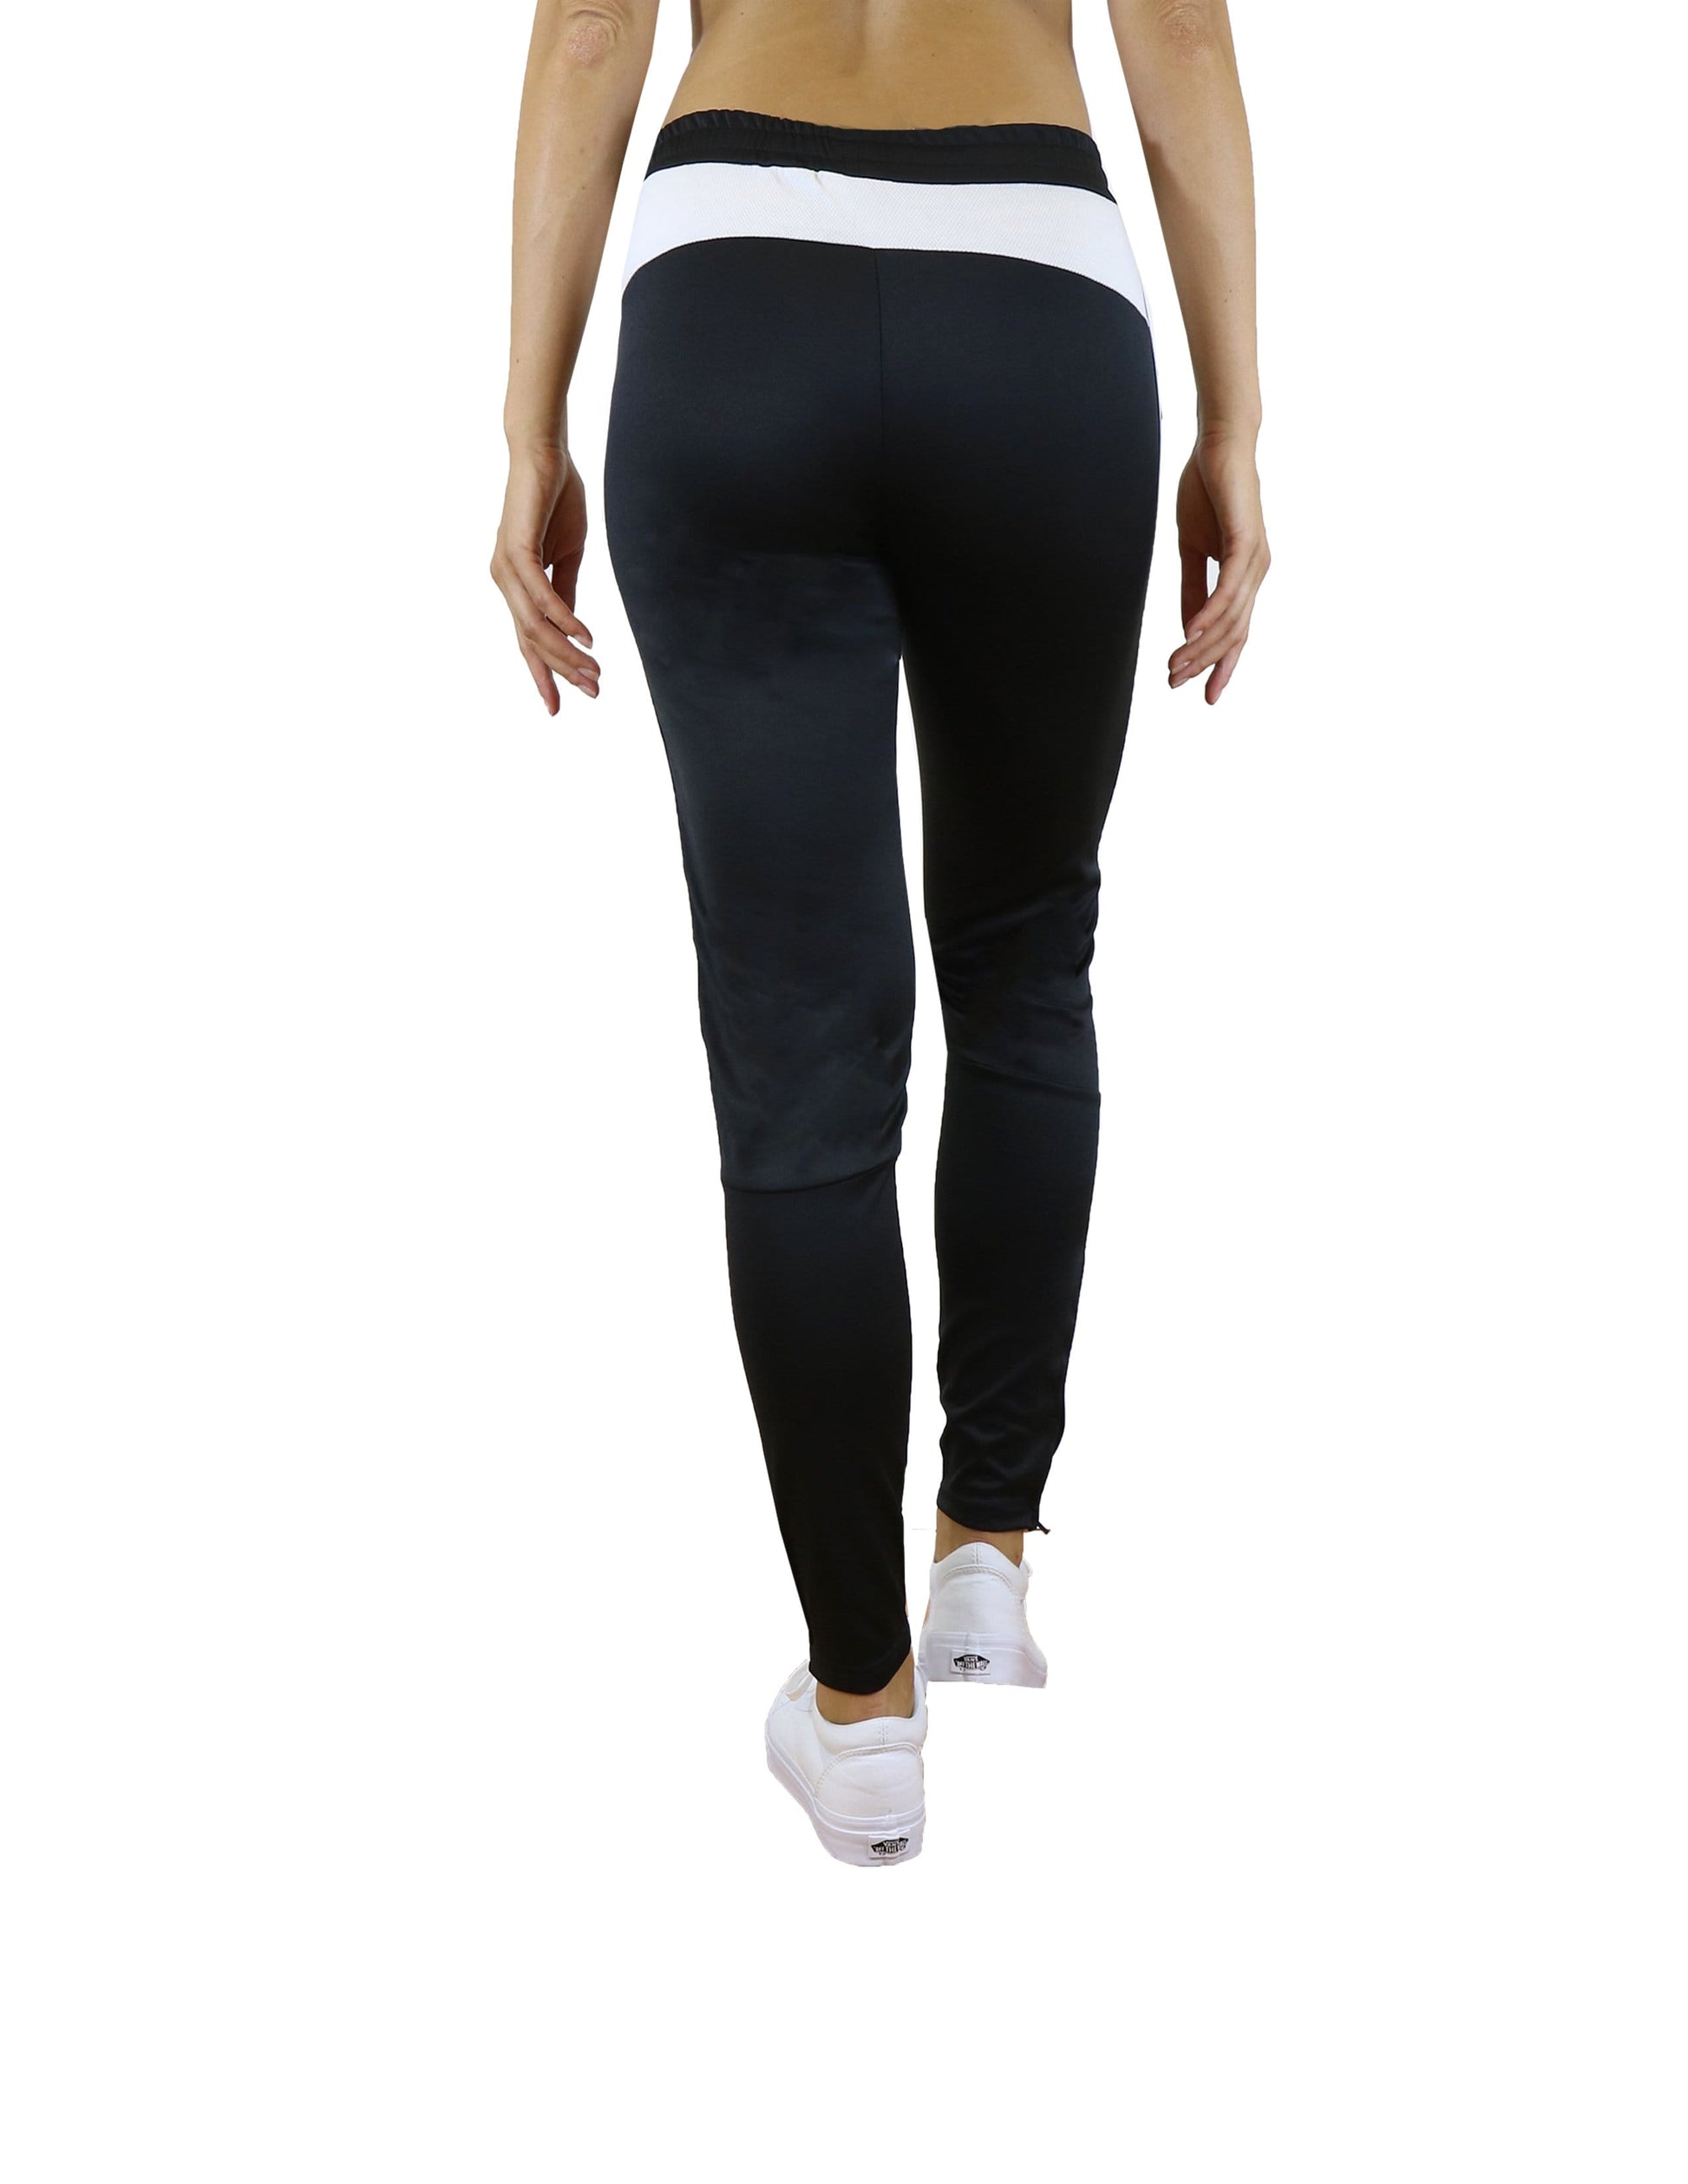 Ladies Track and Soccer Training Pant 250 - GalaxybyHarvic